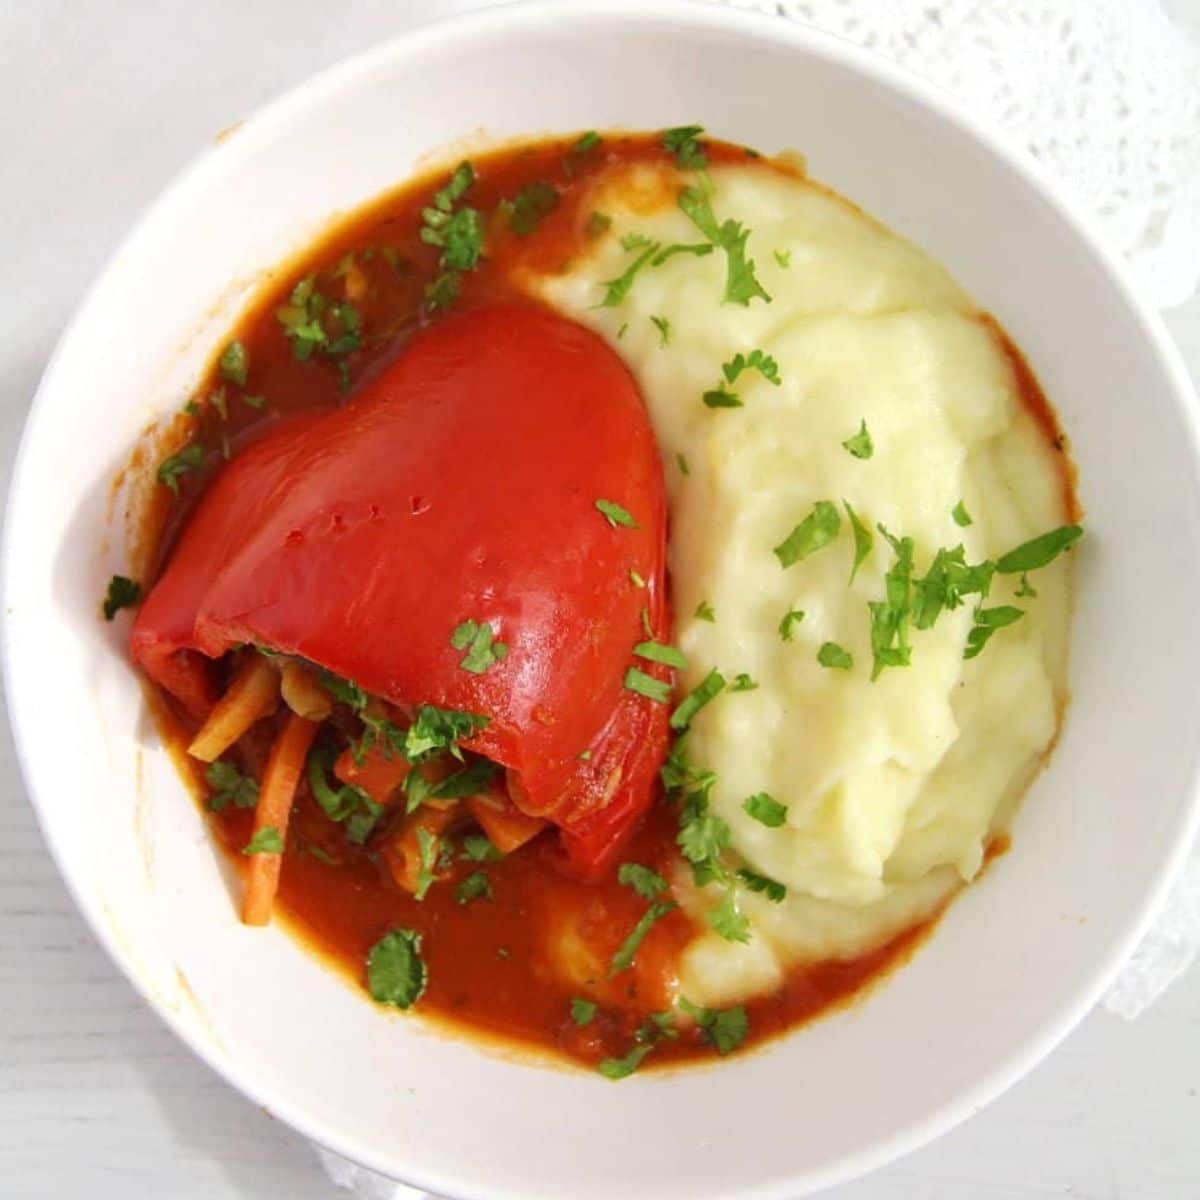 vegan stuffed pepper without rice served with mashed potatoes.